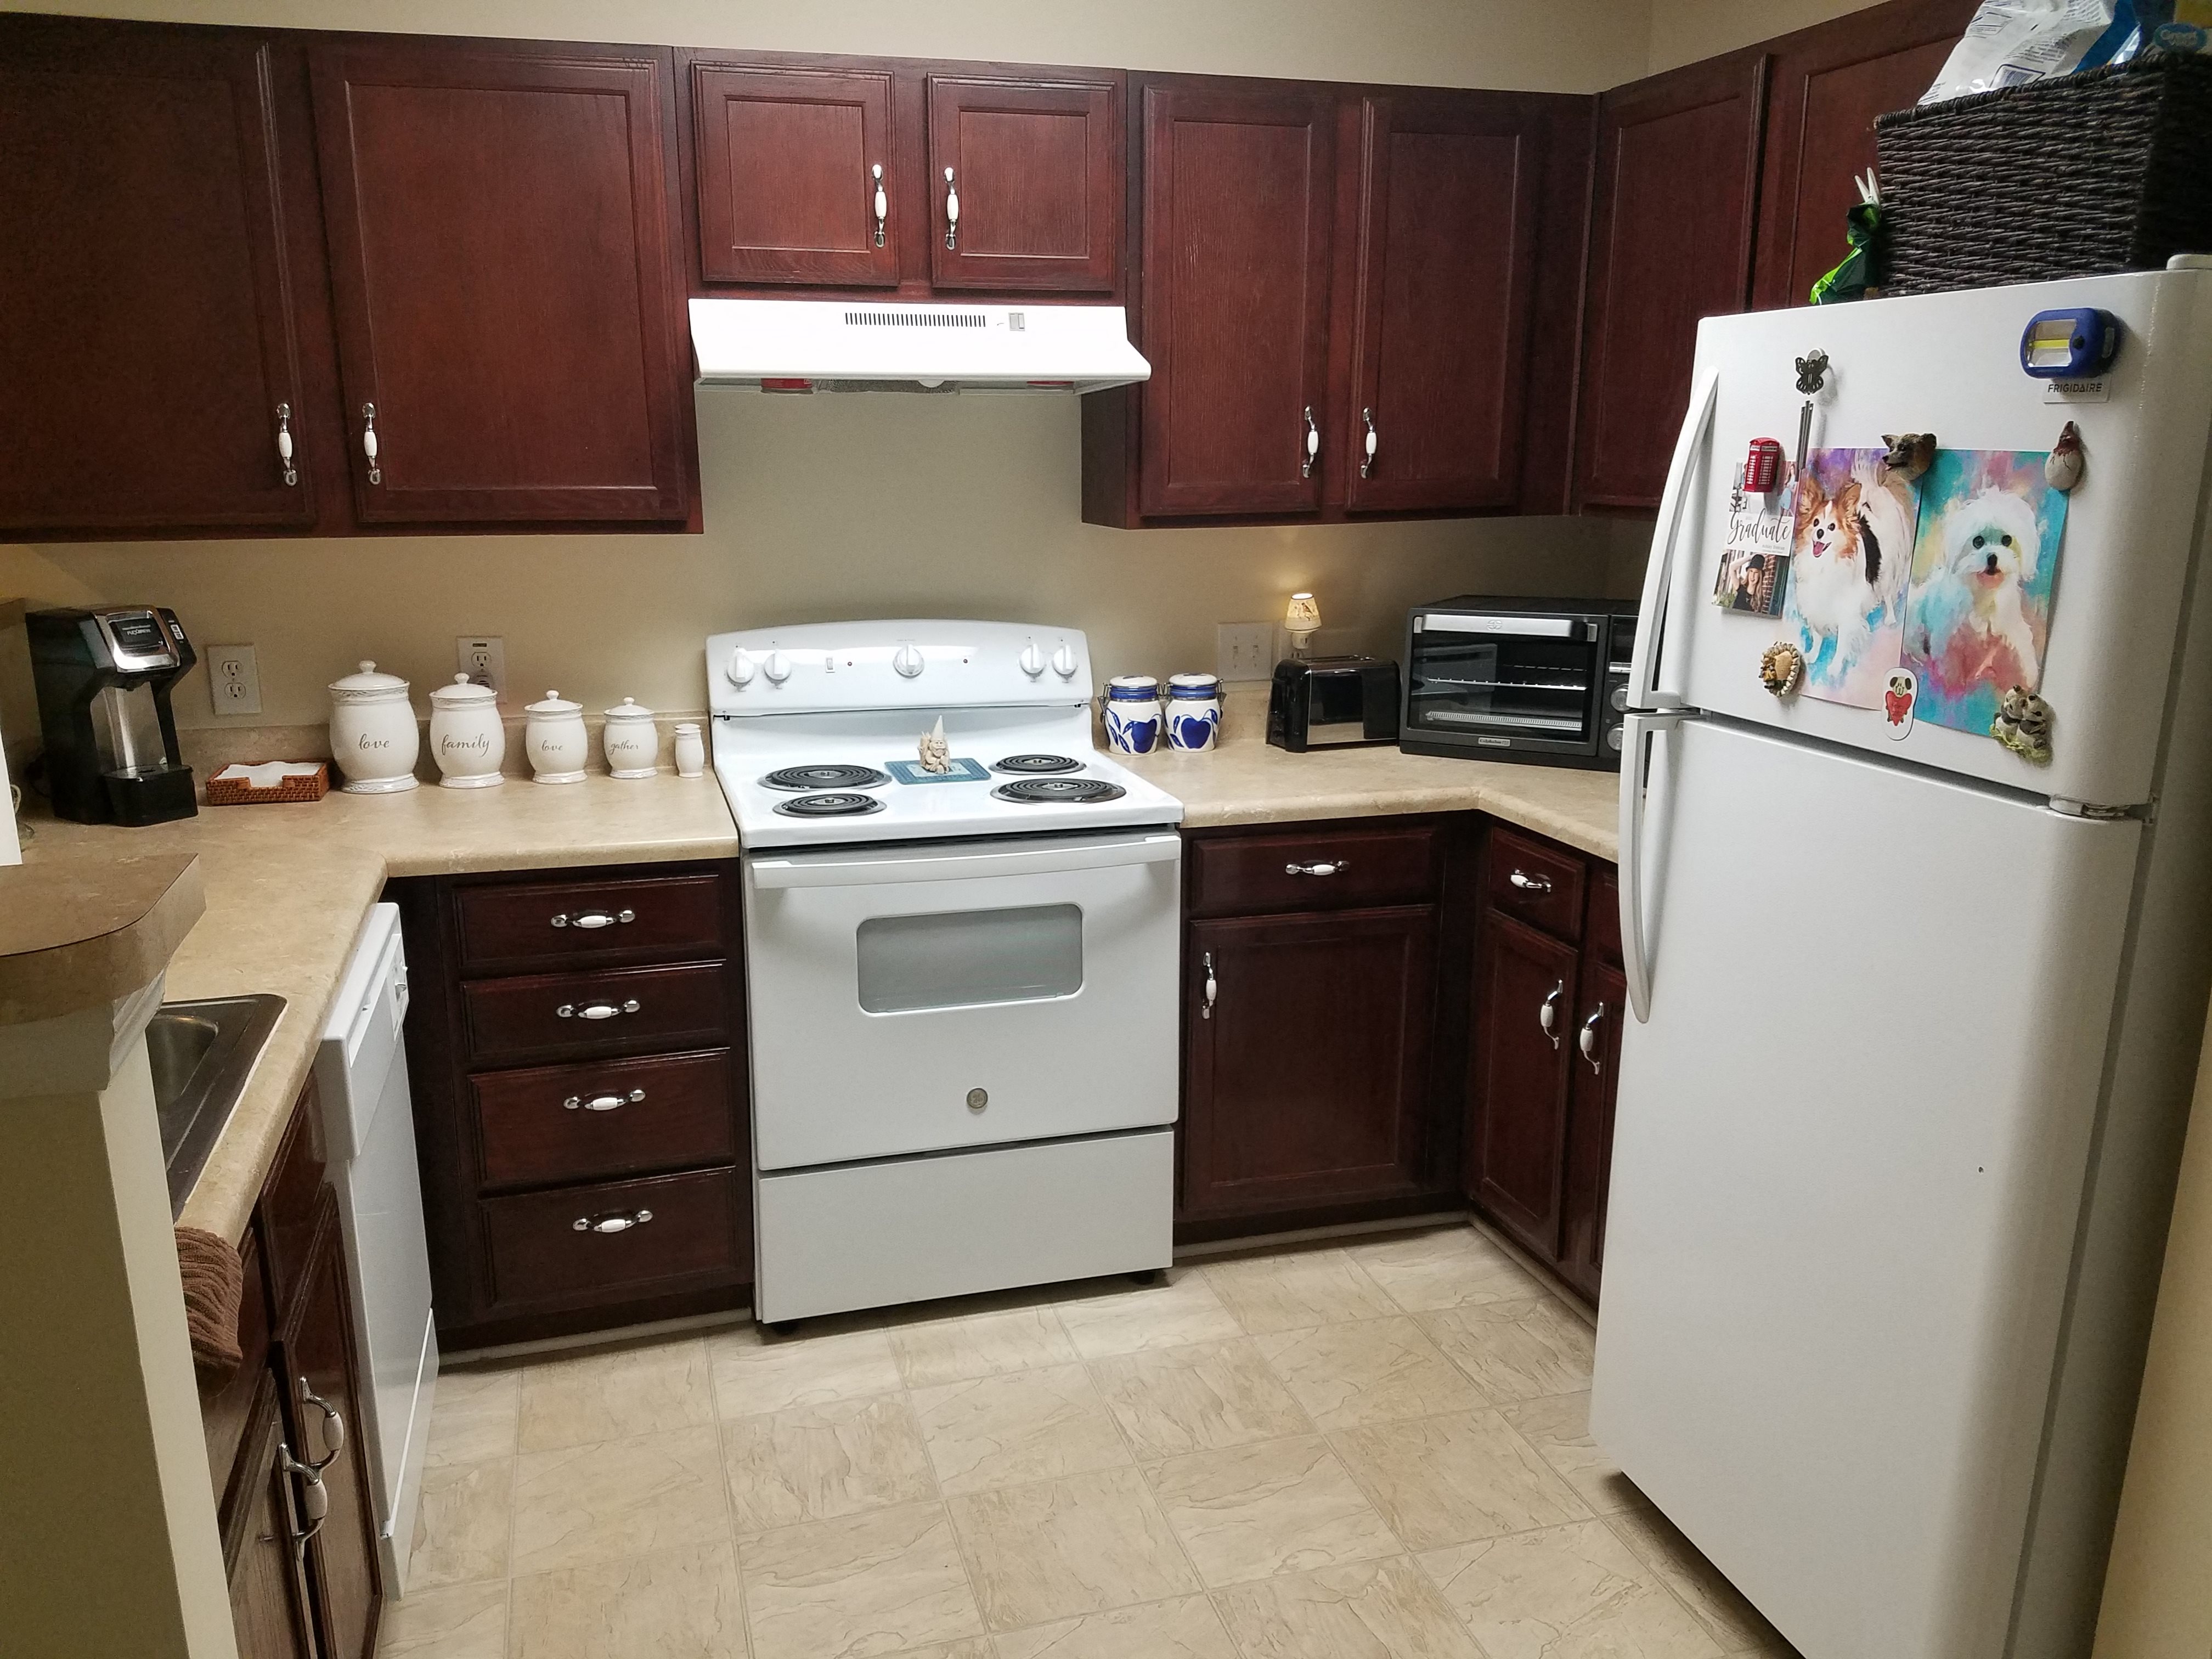 Photos and Video of Mountain View Senior Apts in Kernersville, NC